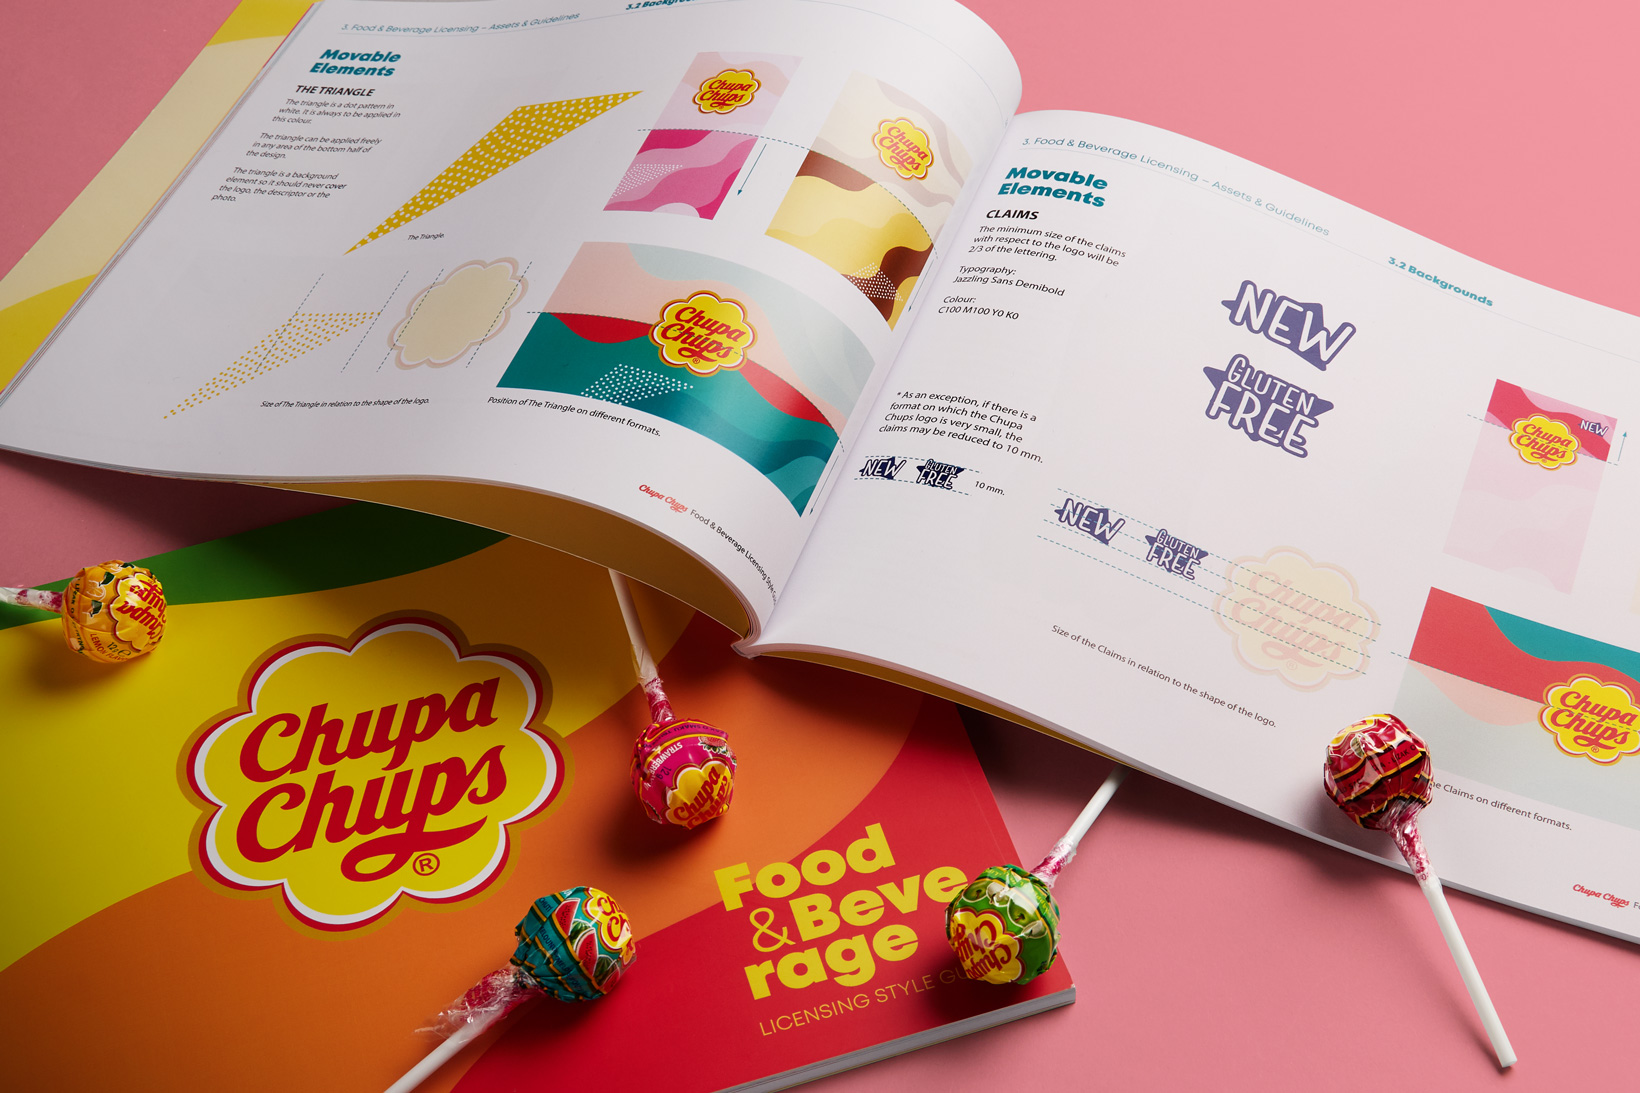 Vibranding designs the guidelines for Chupa Chups packaging licensing -  World Brand Design Society